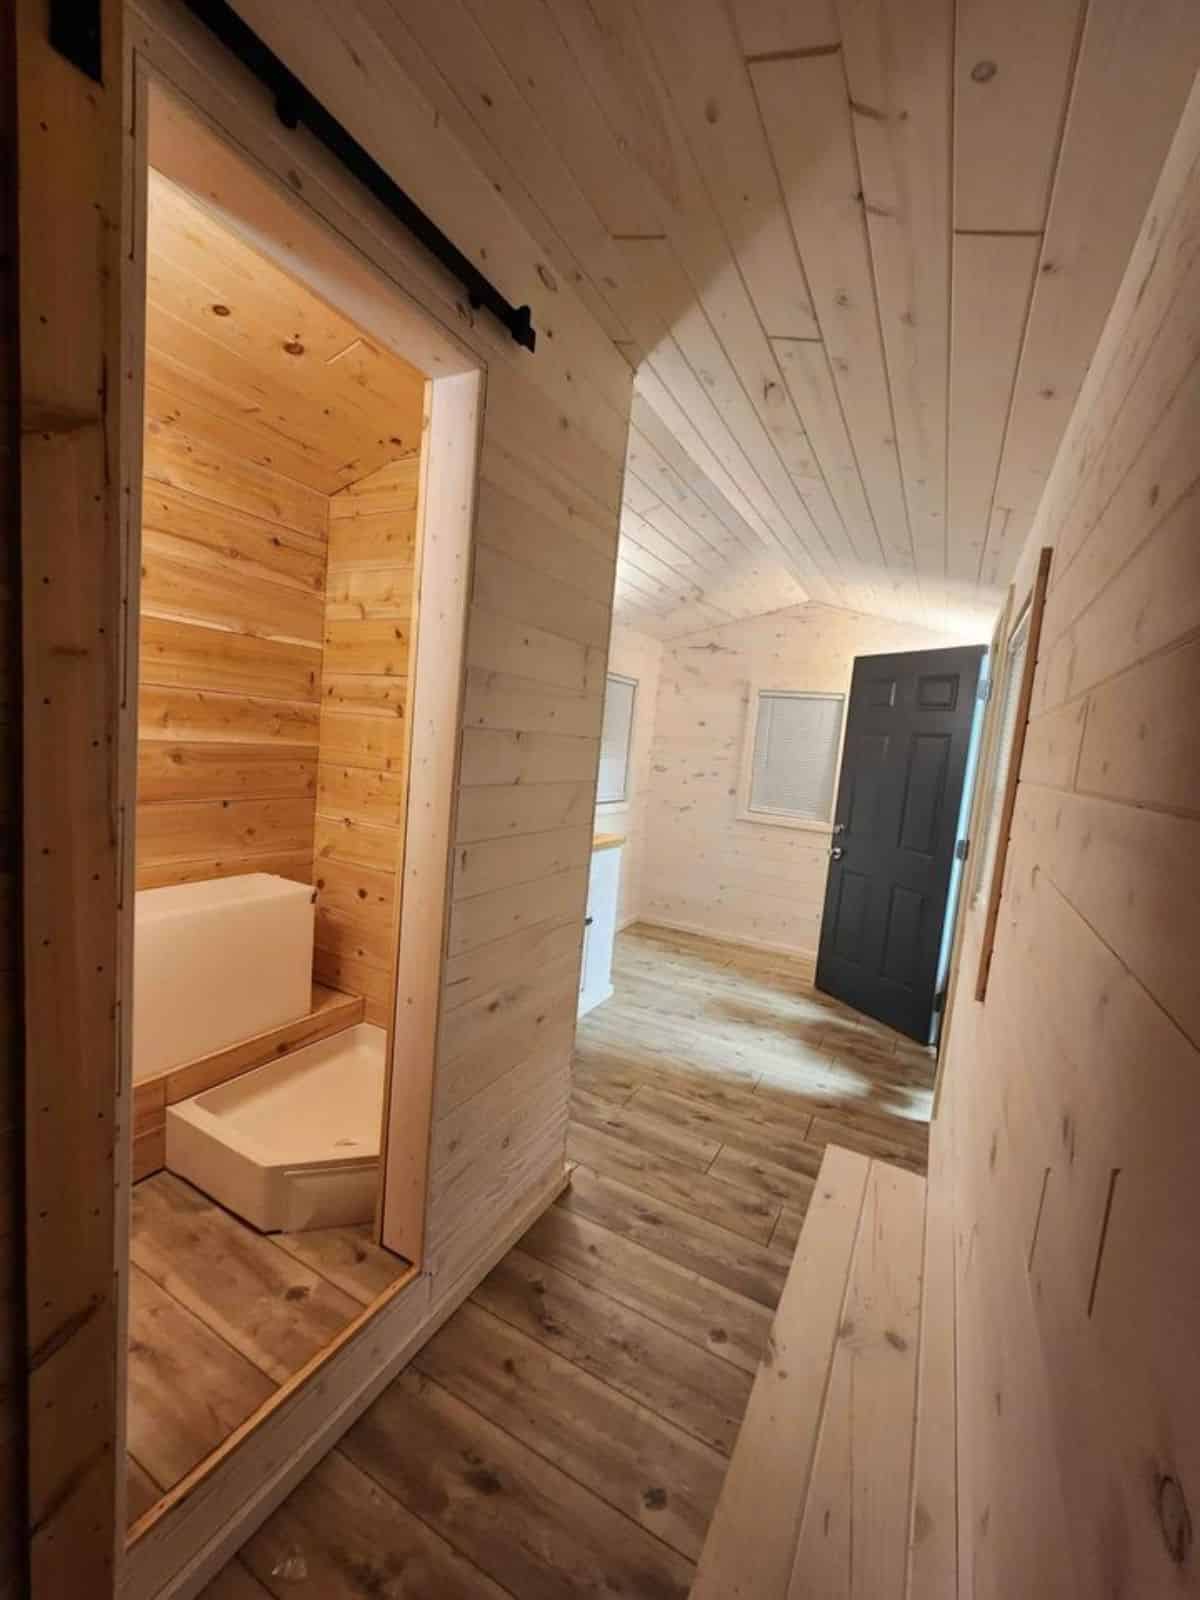 Overall wooden interiors of tiny house camper